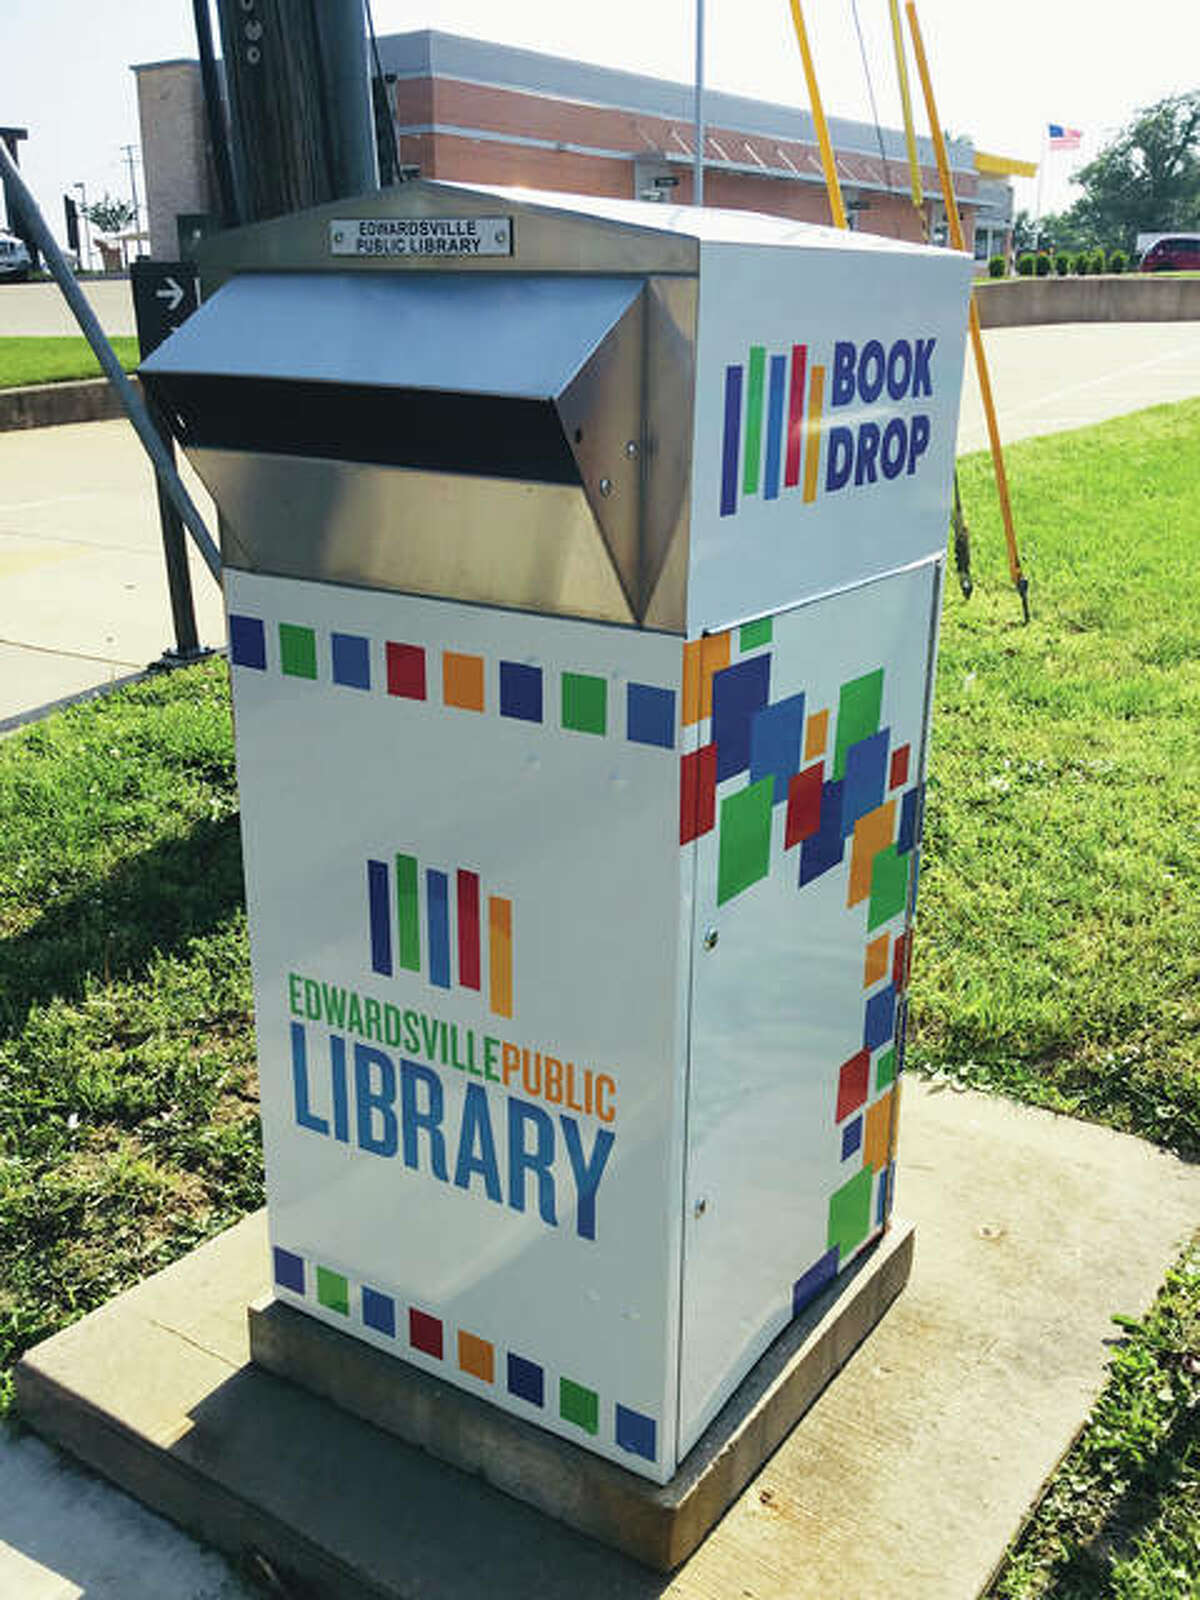 The Edwardsville Public Library’s Montclaire book drop features a new vinyl wrap imprinted with the library’s new logo. The library has five book drops located in the city of Edwardsville, making it more convenient for patrons to return material.